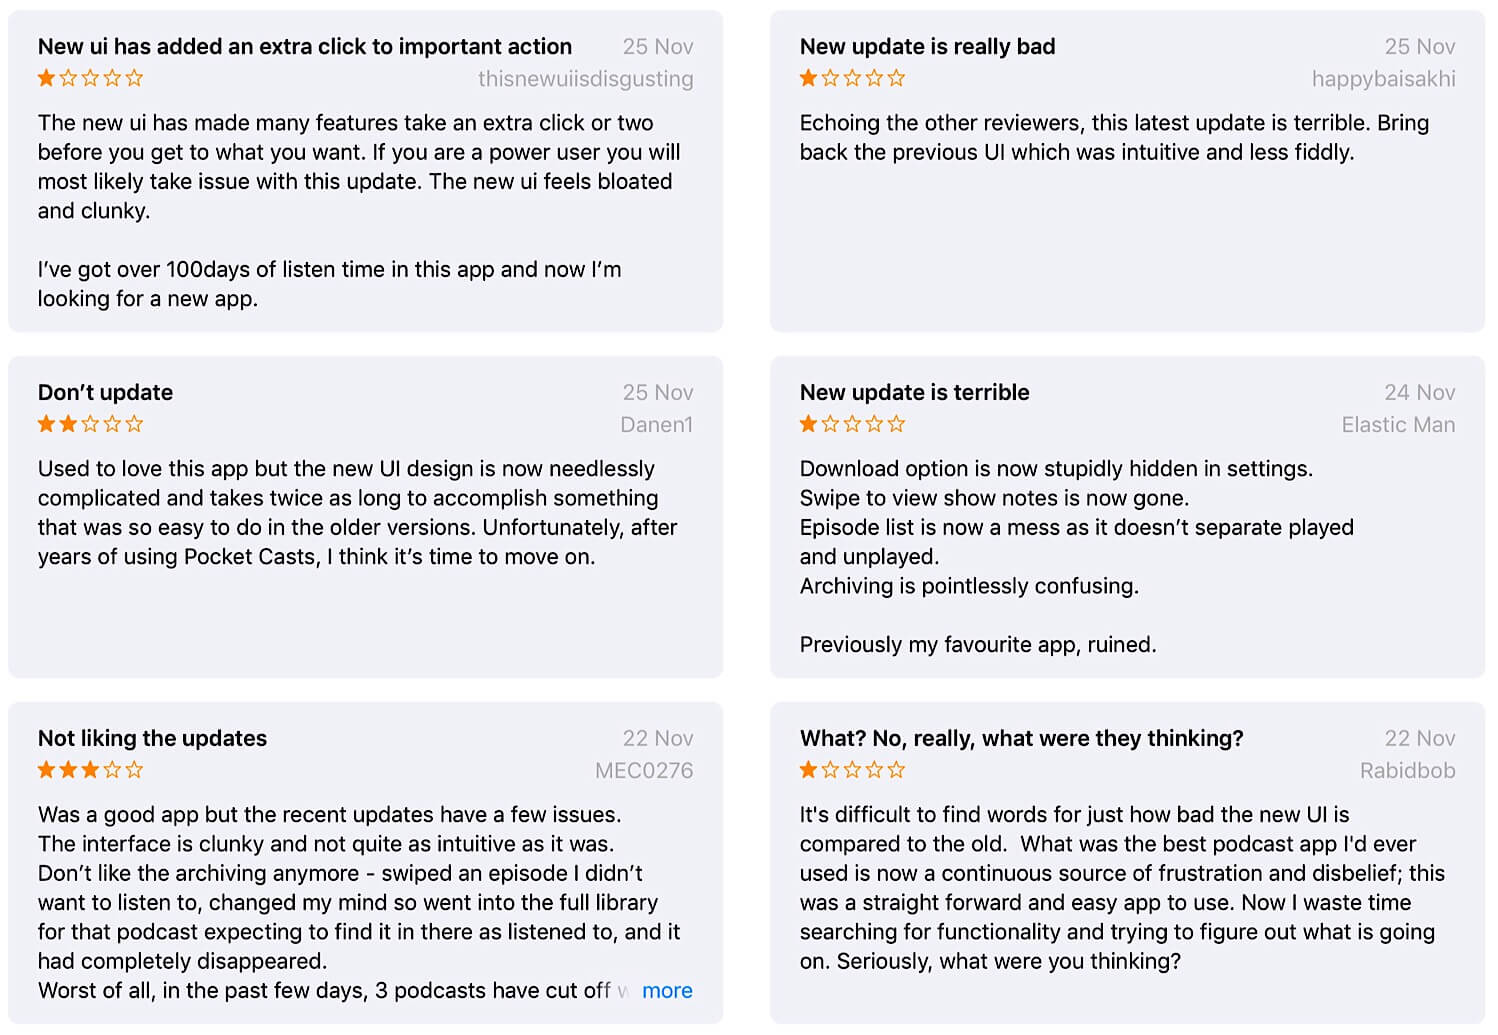 Negative reviews of Pocket Casts version 7 on the iOS App Store.